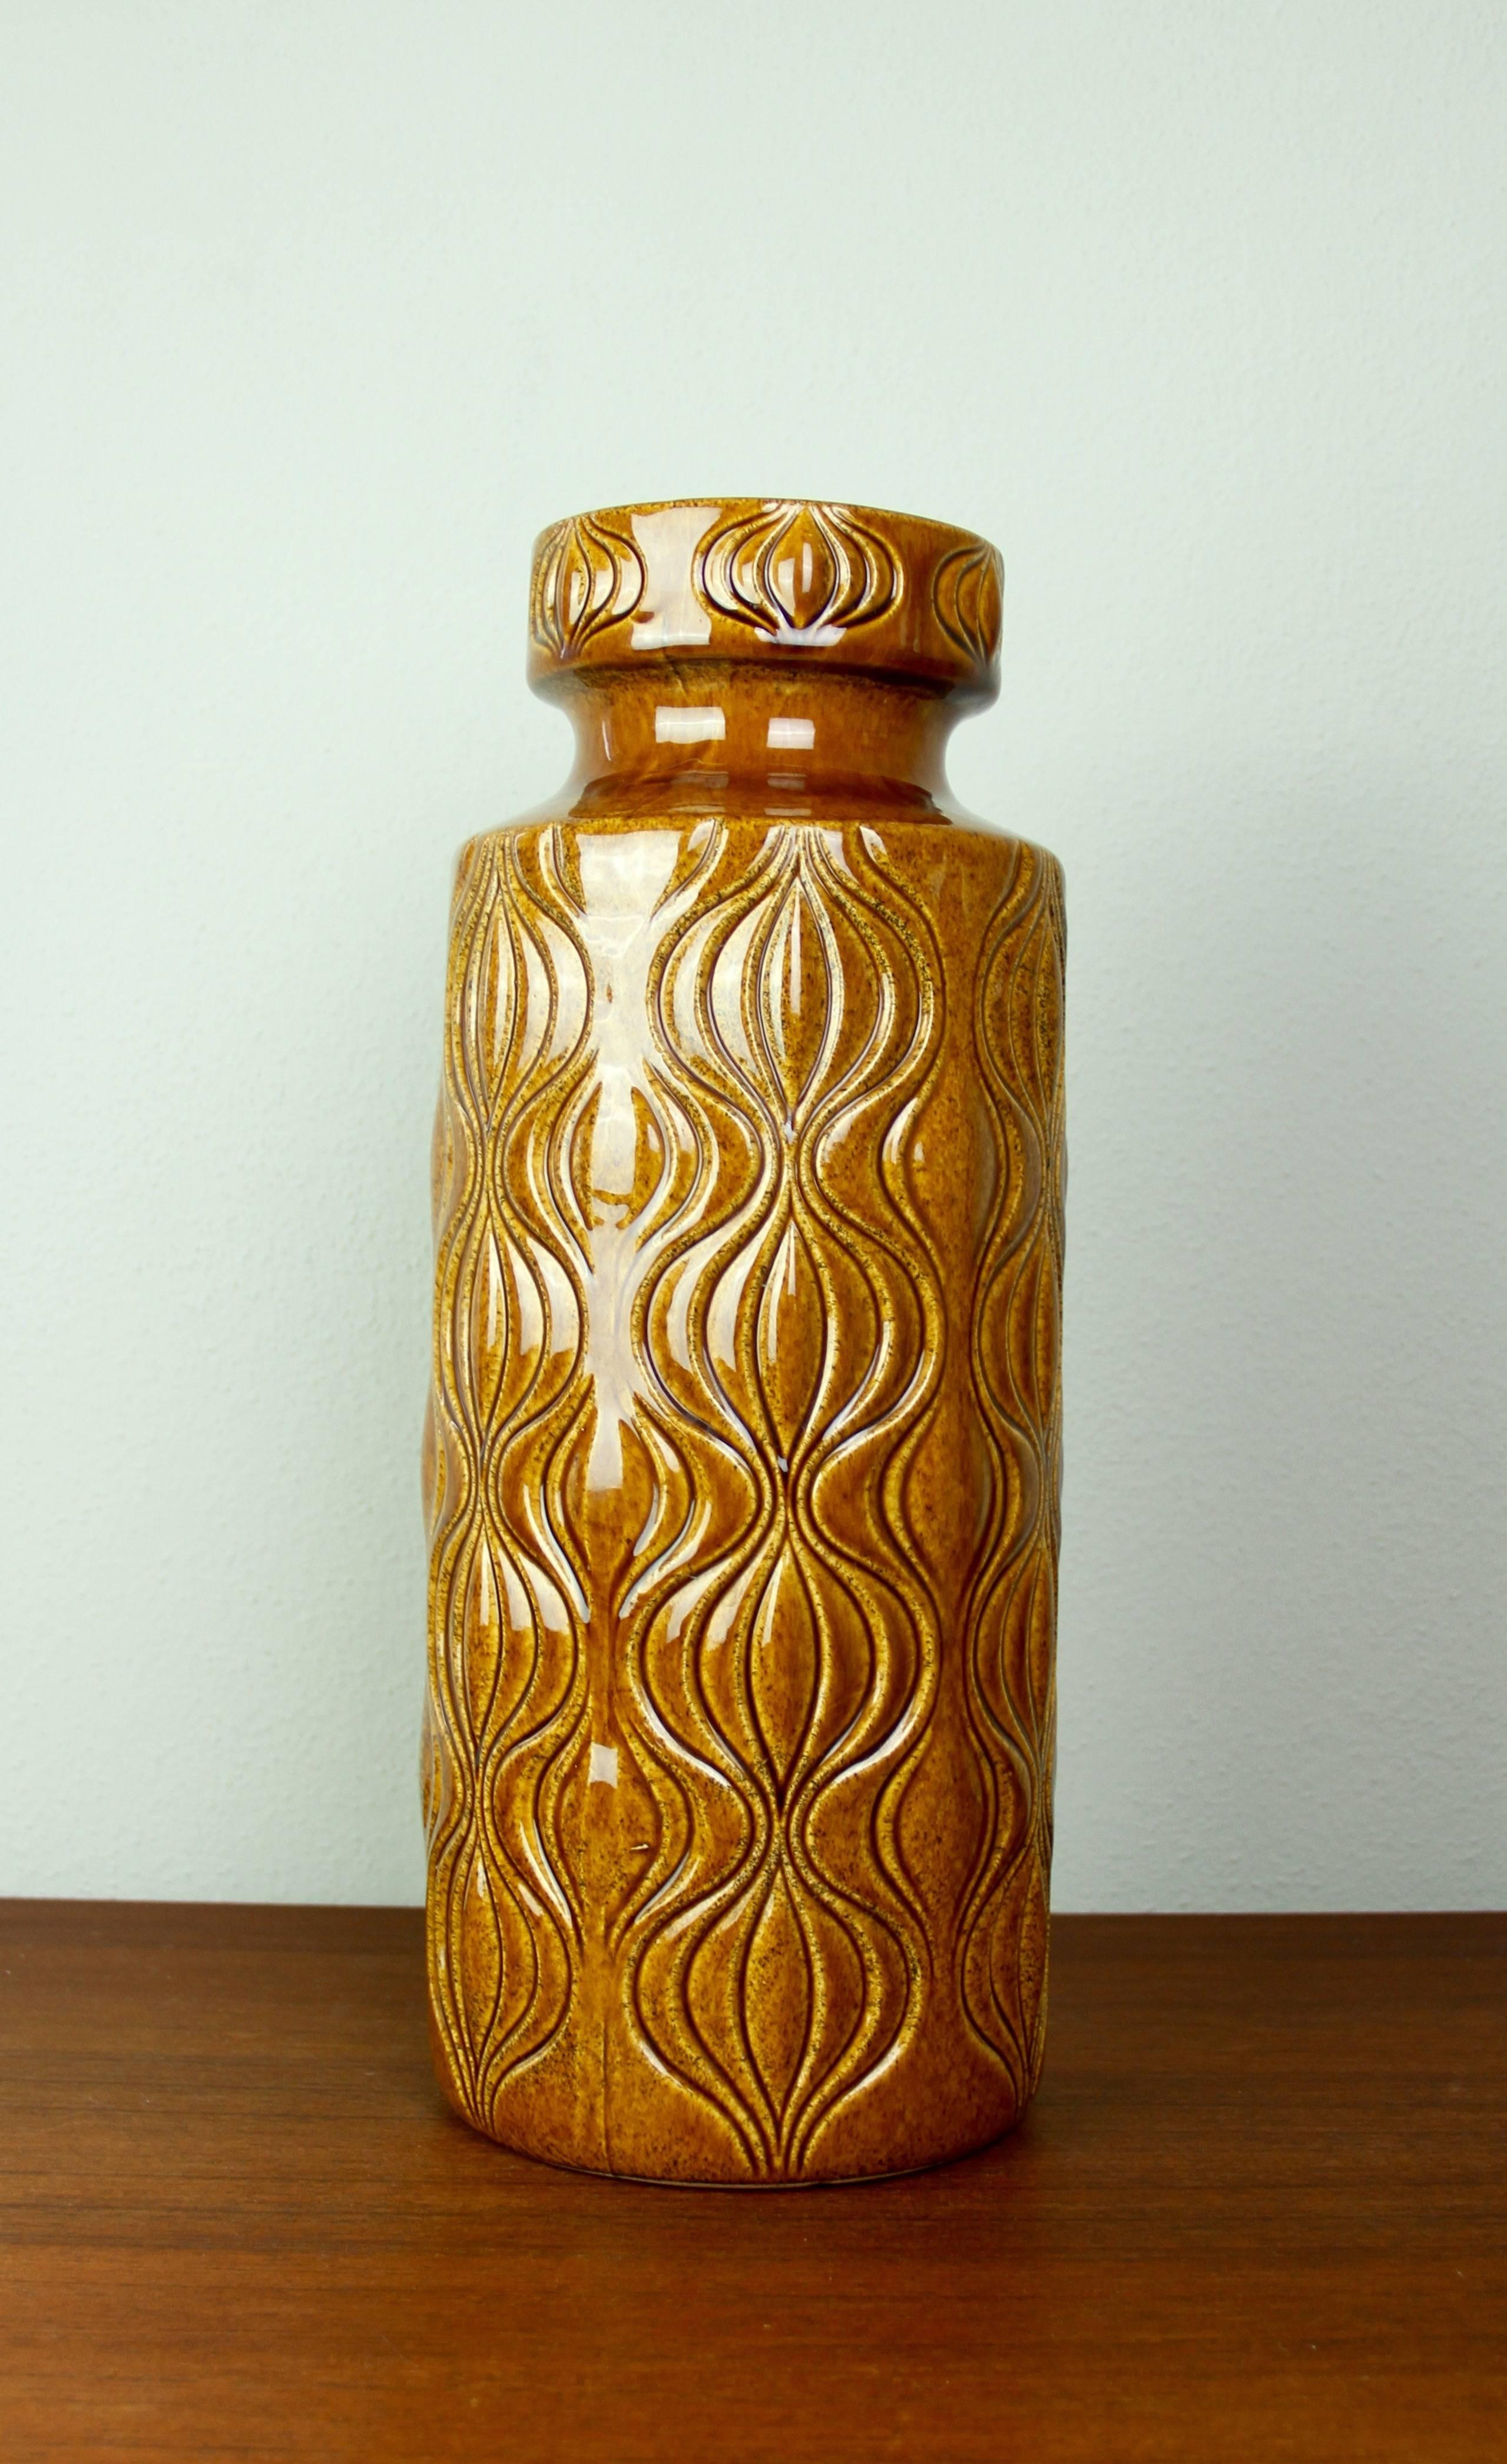 This tall collectable Mid-Century vintage floor vase was produced circa 1965 by the renowned producer of West German pottery - Scheurich Keramik. The vase features the famous 'Amsterdam' relief pattern in a lovely amber brown high gloss glaze. The